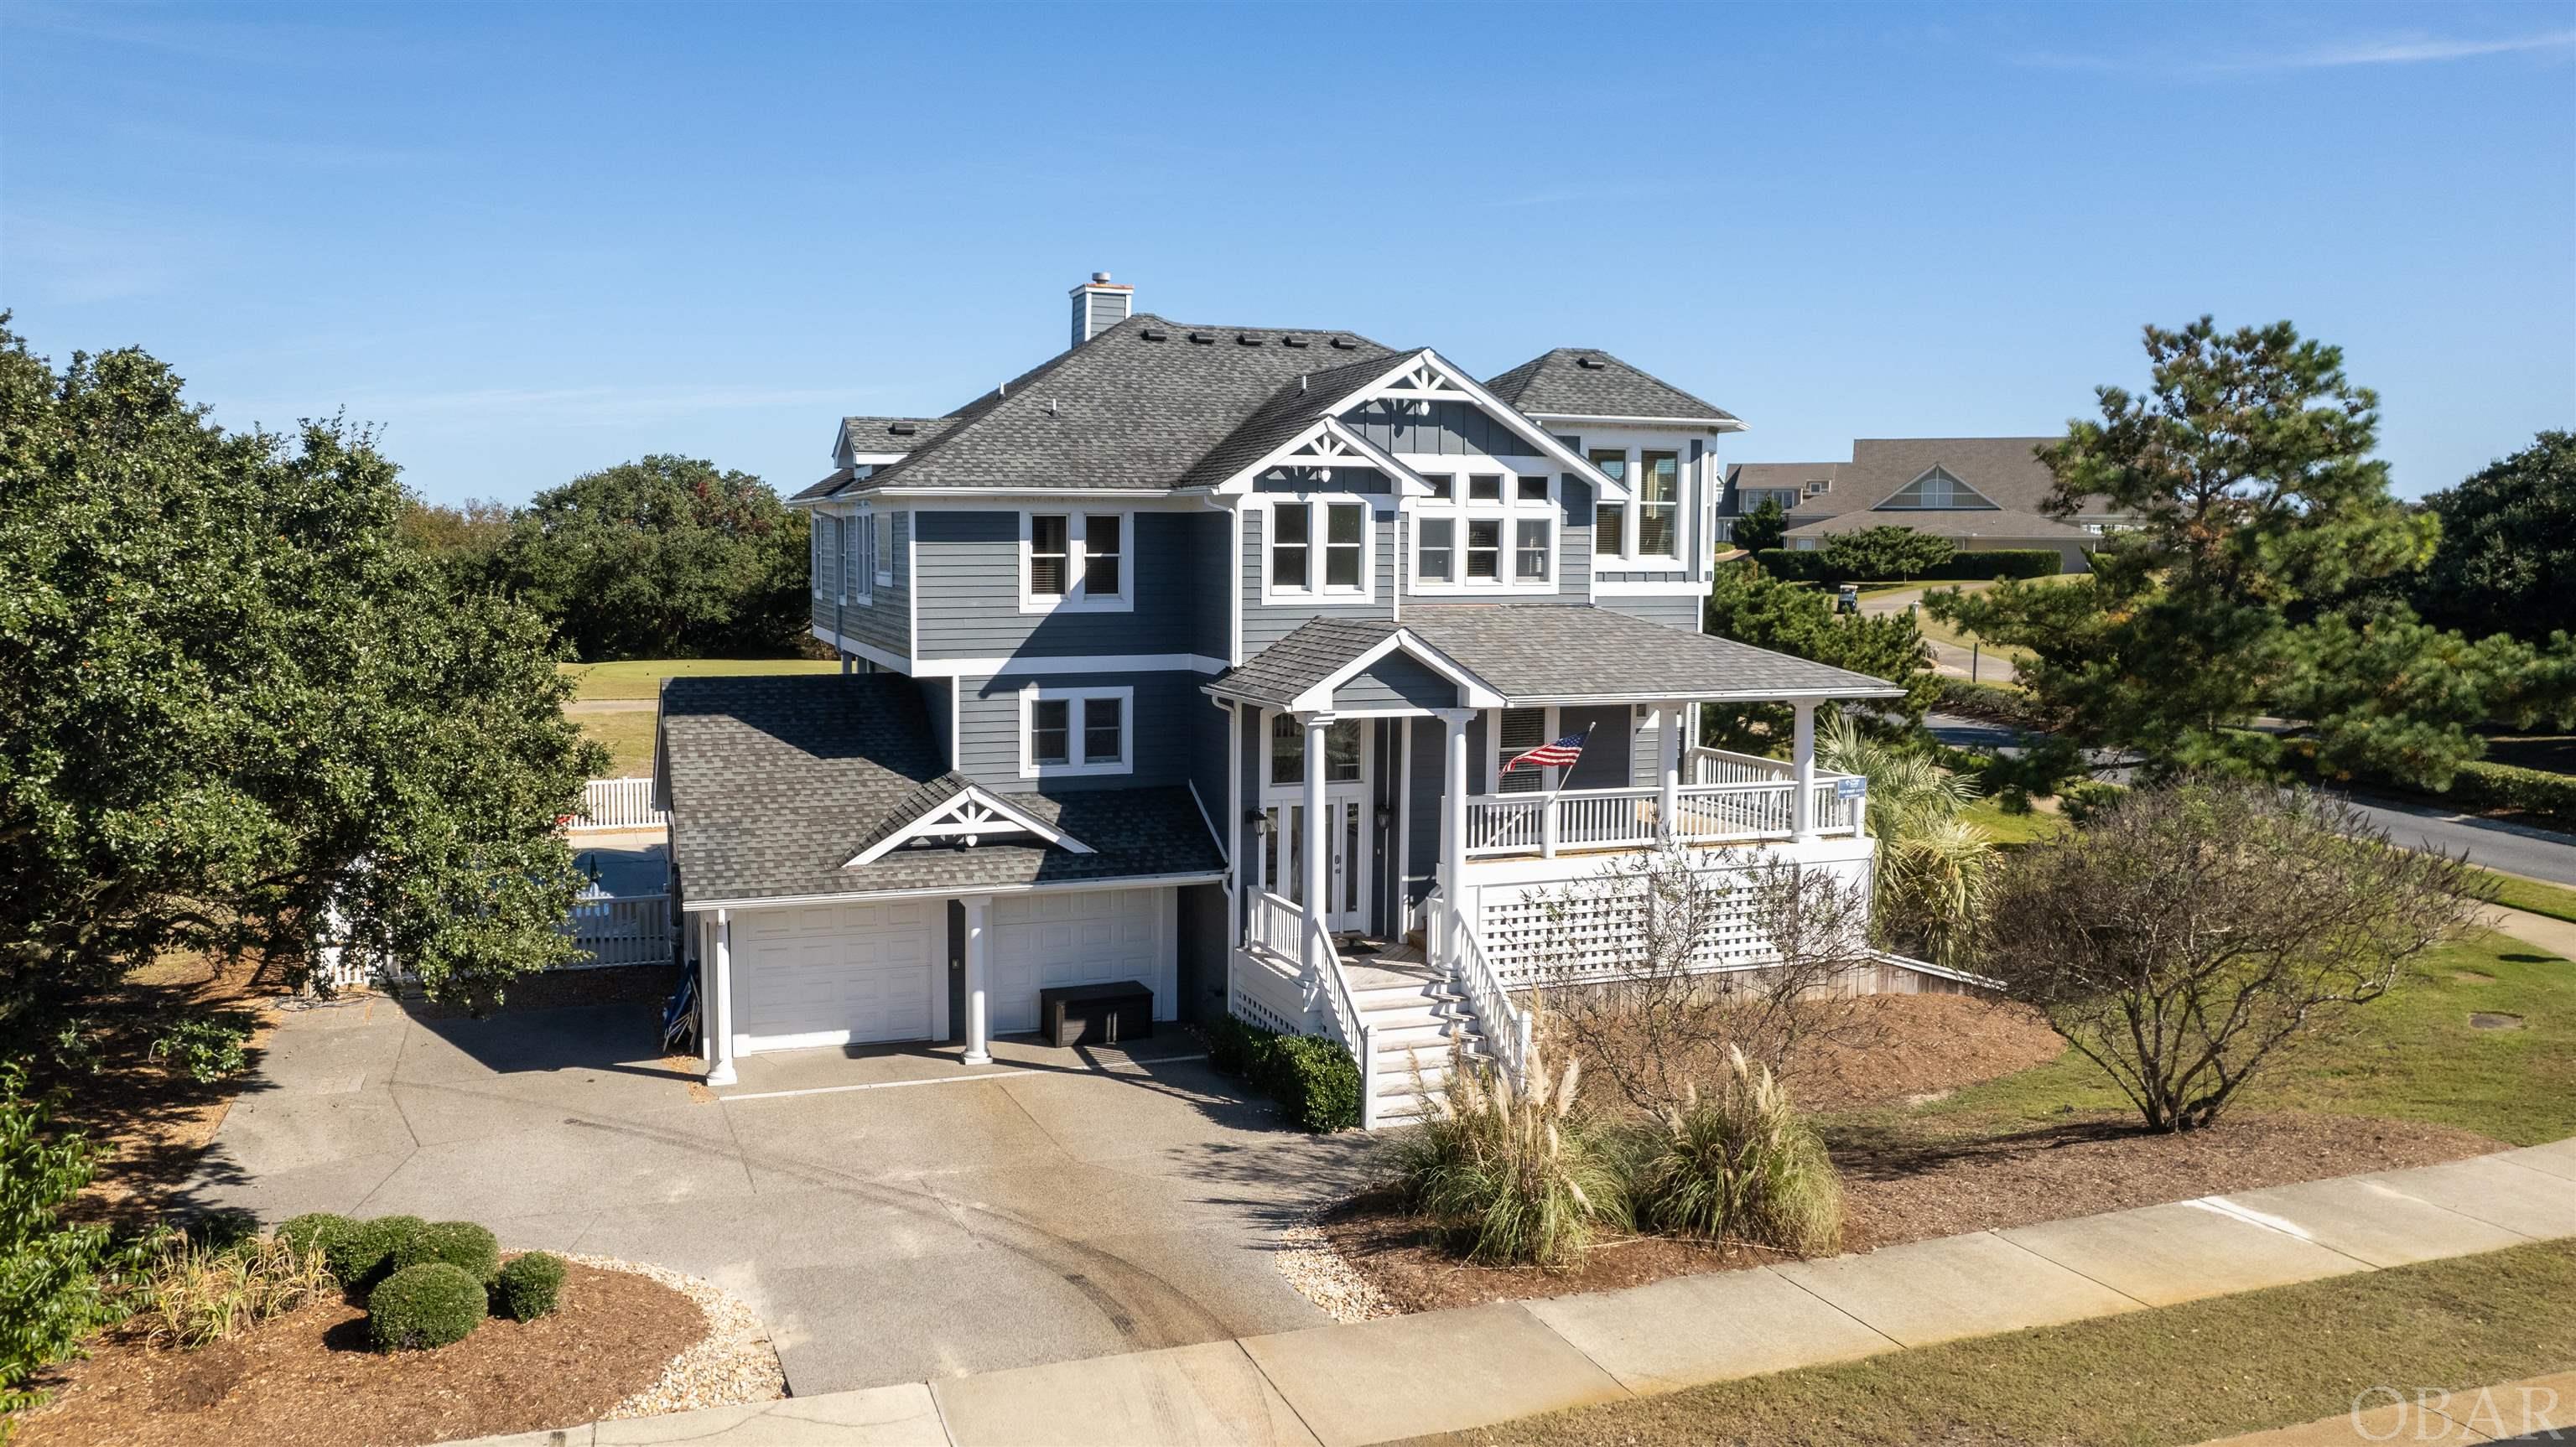 It's a "Beach Par Tee" in the comfort of this 8 bedroom retreat situated on a corner lot in the private gated Currituck Club Resort Community of Corolla, NC! Perched on the 10th tee box with beautiful views of the green and close proximity to the Currituck Sound, clubhouse, pool, grille, fitness center, and seasonal trolley stop for easy access to the beach, this property has all the home and community amenities your heart could desire for a second home, full time residence, or investment opportunity! A large open concept great room w/ custom cabinets, a gas fireplace & oversized windows boasting natural light throughout, gourmet kitchen with granite countertops & dual stainless appliances, island & dining seating, an elevated ship's watch, and half bath. The top floor en suite is well equipped with dual vanities, a soaking tub & standalone shower. On the second floor, four en suites (three with direct deck access) serves as the perfect place to relax and enjoy time spent on the shaded decks or soaking in the hot tub. The first floor features a large game room w/ ping pong, foosball, and media, a half bath, master en suite, two bedrooms, full shared bath, and laundry. This is a great place to unwind after time spent on the beautiful white sandy beaches of Corolla or enjoying the homes extensive outdoor amenities to include a private pool, tiki bar w/ seating & entertainment, outside shower, sun & covered decks.